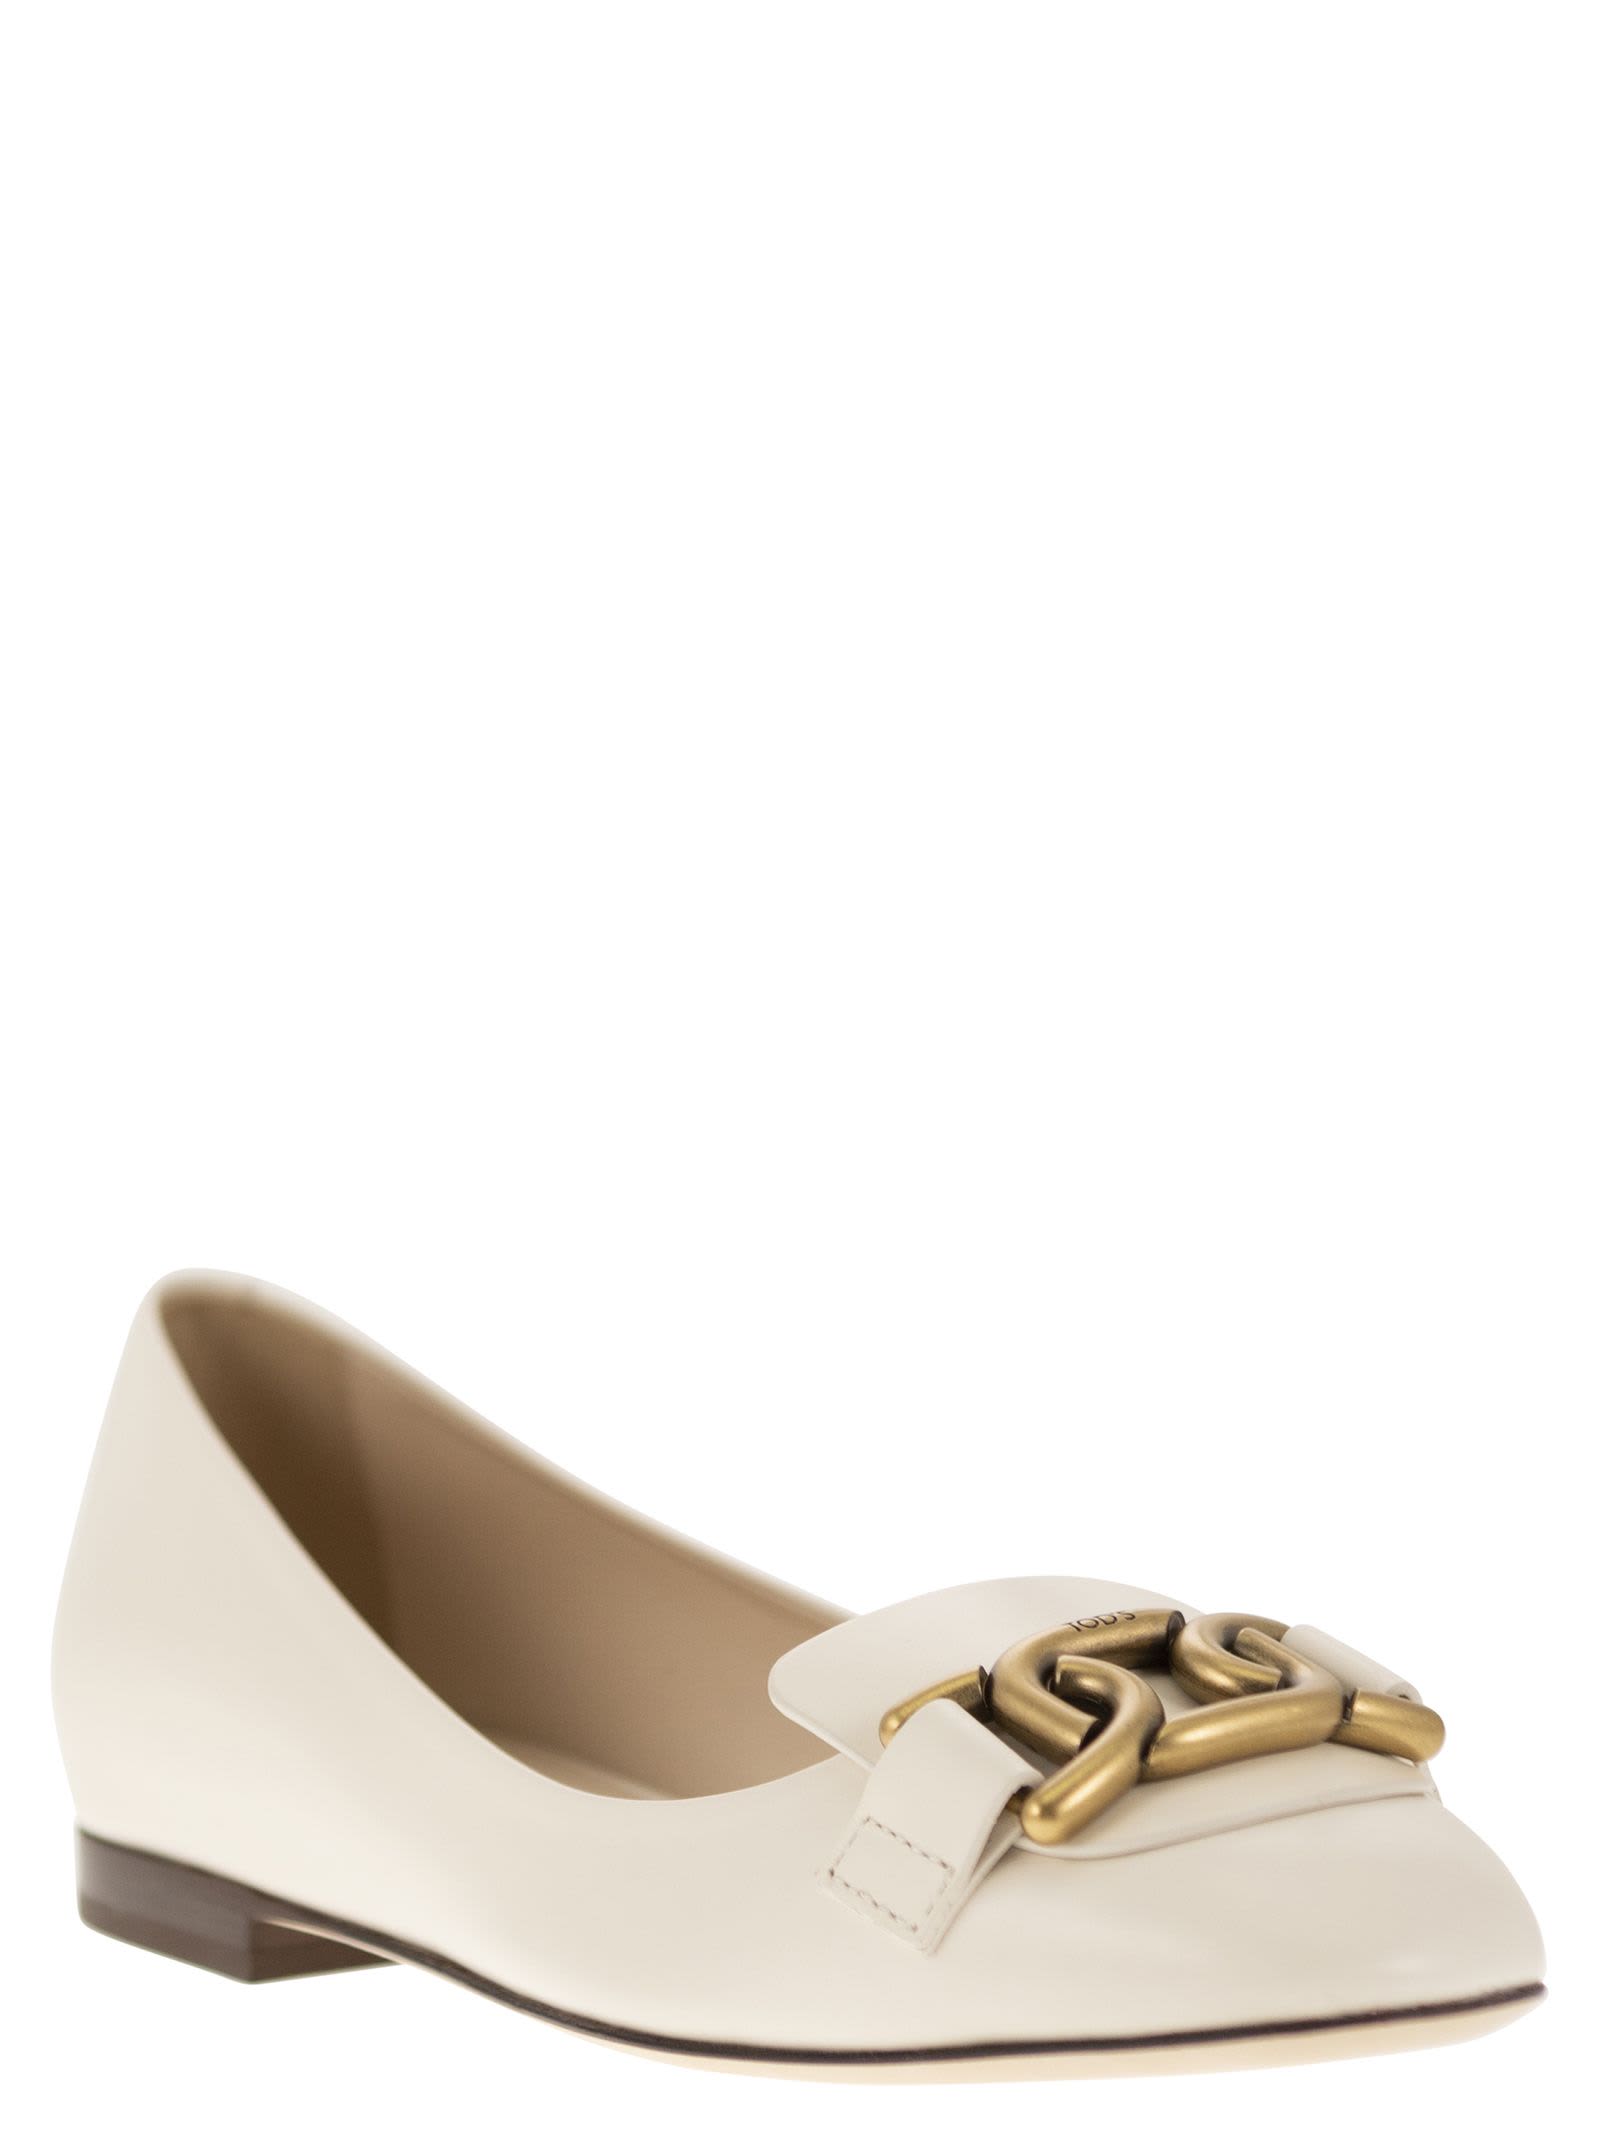 Shop Tod's Leather Ballerina With Accessory Tods